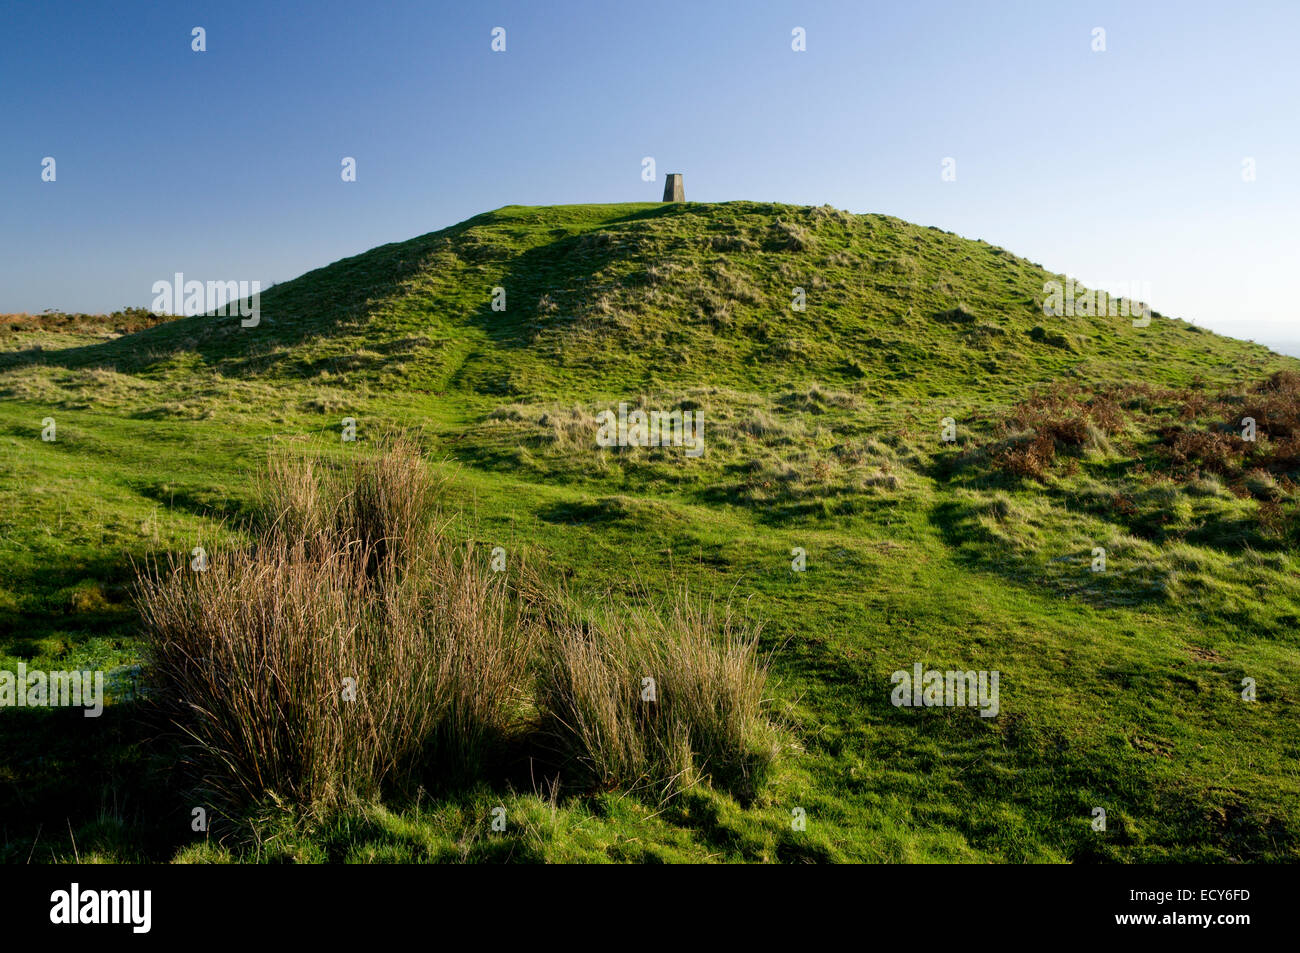 Tumulus on the top of the Garth Mountain above Taffs Well, South Wales Valleys, Wales, UK. Stock Photo